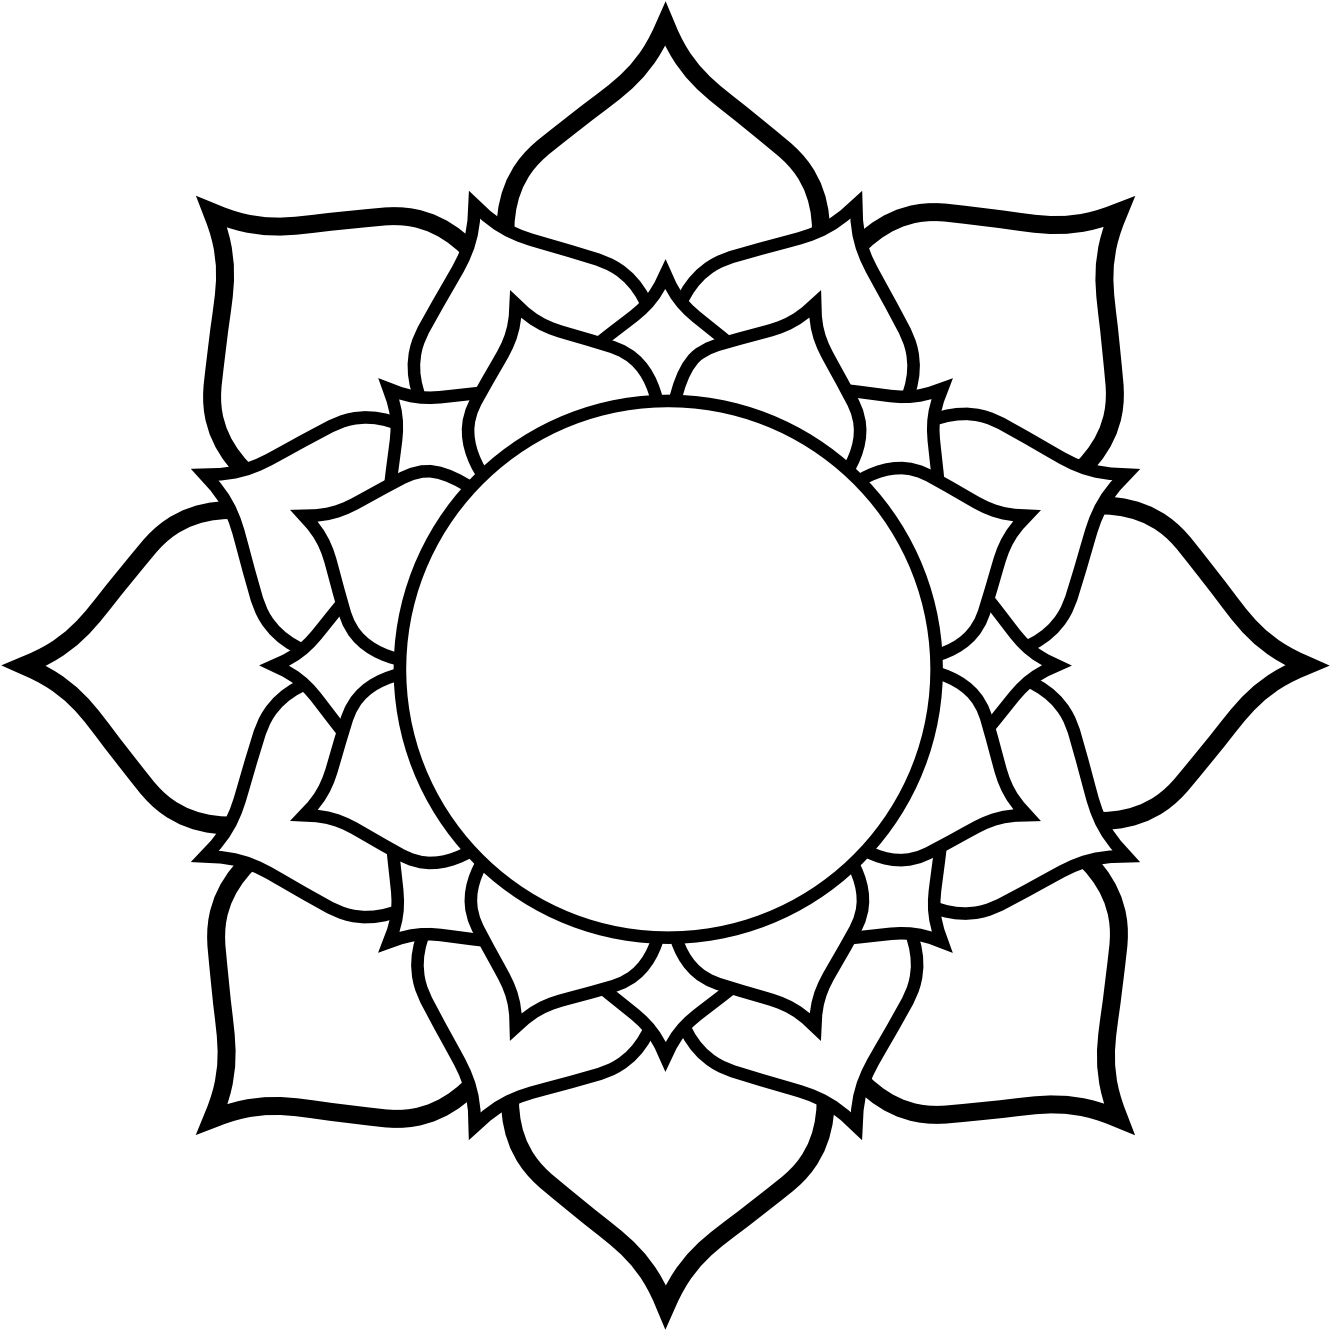 Lotus Flowers openclipart.org xochi.